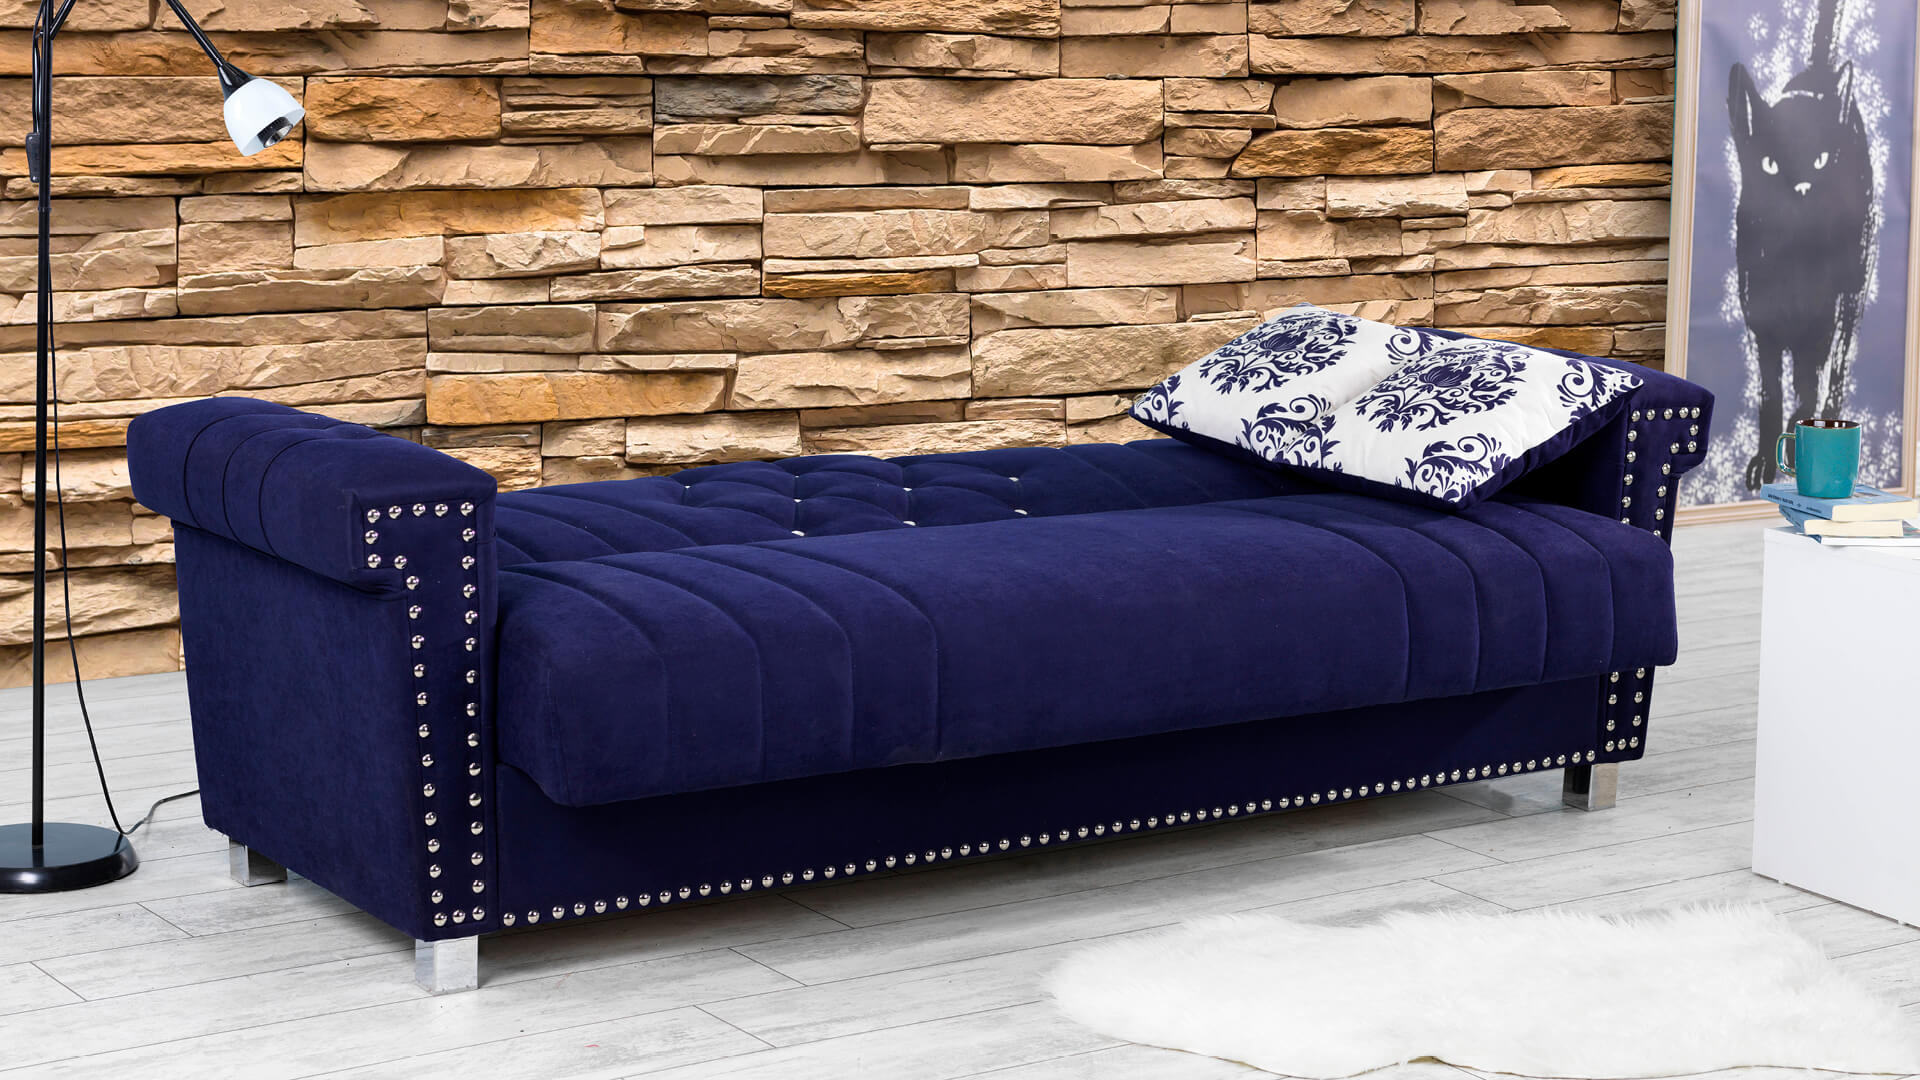 Beverly Hills | Sofa Beds